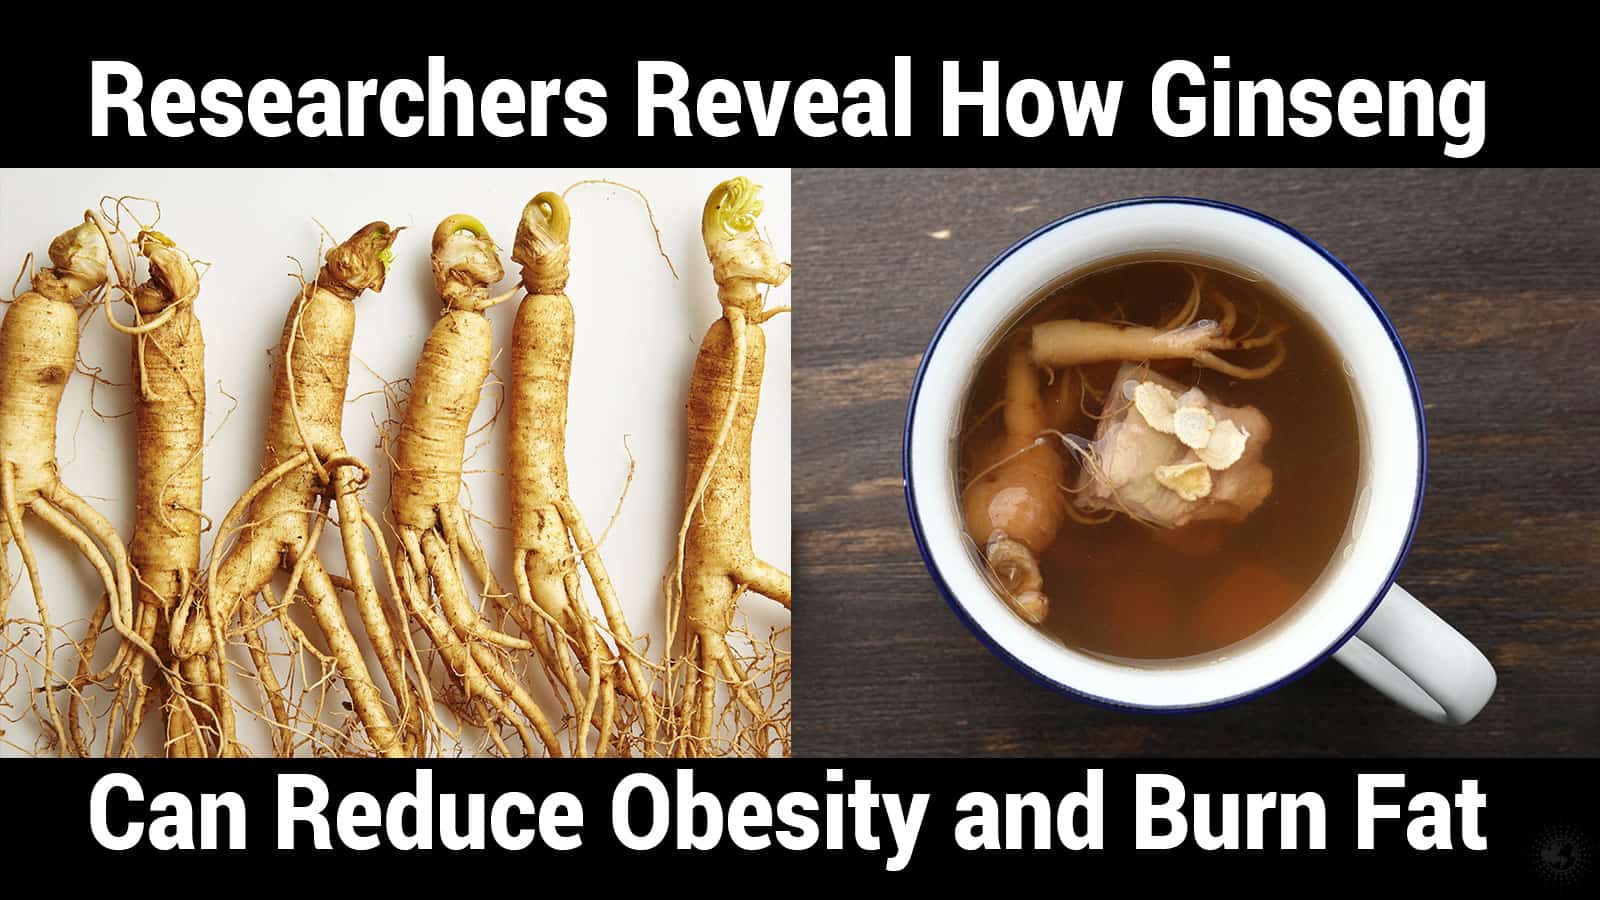 Researchers Reveal How Ginseng Can Reduce Obesity and Burn Fat